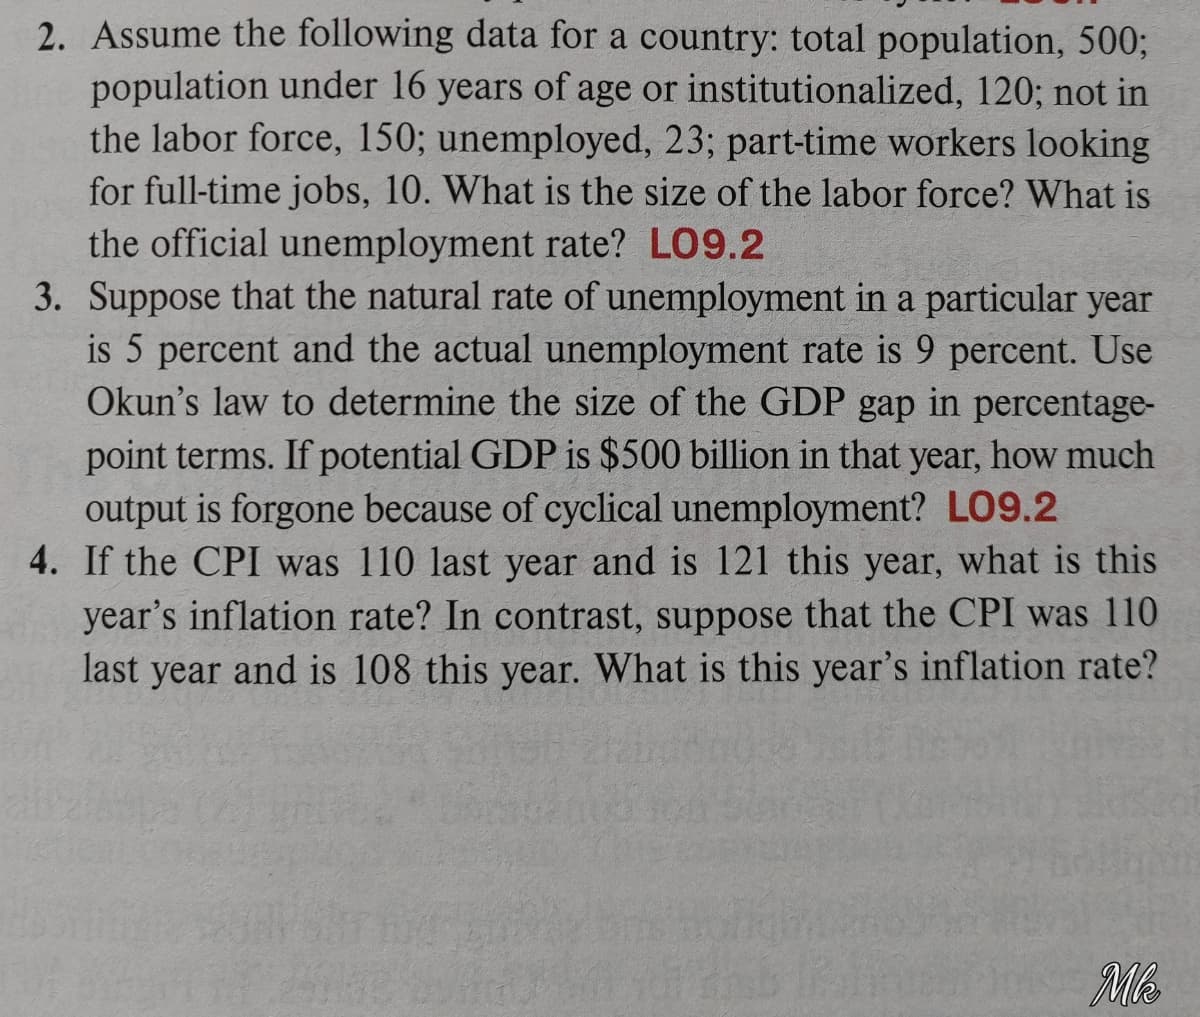 2. Assume the following data for a country: total population, 500%;
population under 16 years of age or institutionalized, 120; not in
the labor force, 150; unemployed, 23; part-time workers looking
for full-time jobs, 10. What is the size of the labor force? What is
the official unemployment rate? LO9.2
3. Suppose that the natural rate of unemployment in a particular year
is 5 percent and the actual unemployment rate is 9 percent. Use
Okun's law to determine the size of the GDP gap in percentage-
point terms. If potential GDP is $500 billion in that year, how much
output is forgone because of cyclical unemployment? LO9.2
4. If the CPI was 110 last year and is 121 this year, what is this
year's inflation rate? In contrast, suppose that the CPI was 110
last year and is 108 this year. What is this year's inflation rate?
